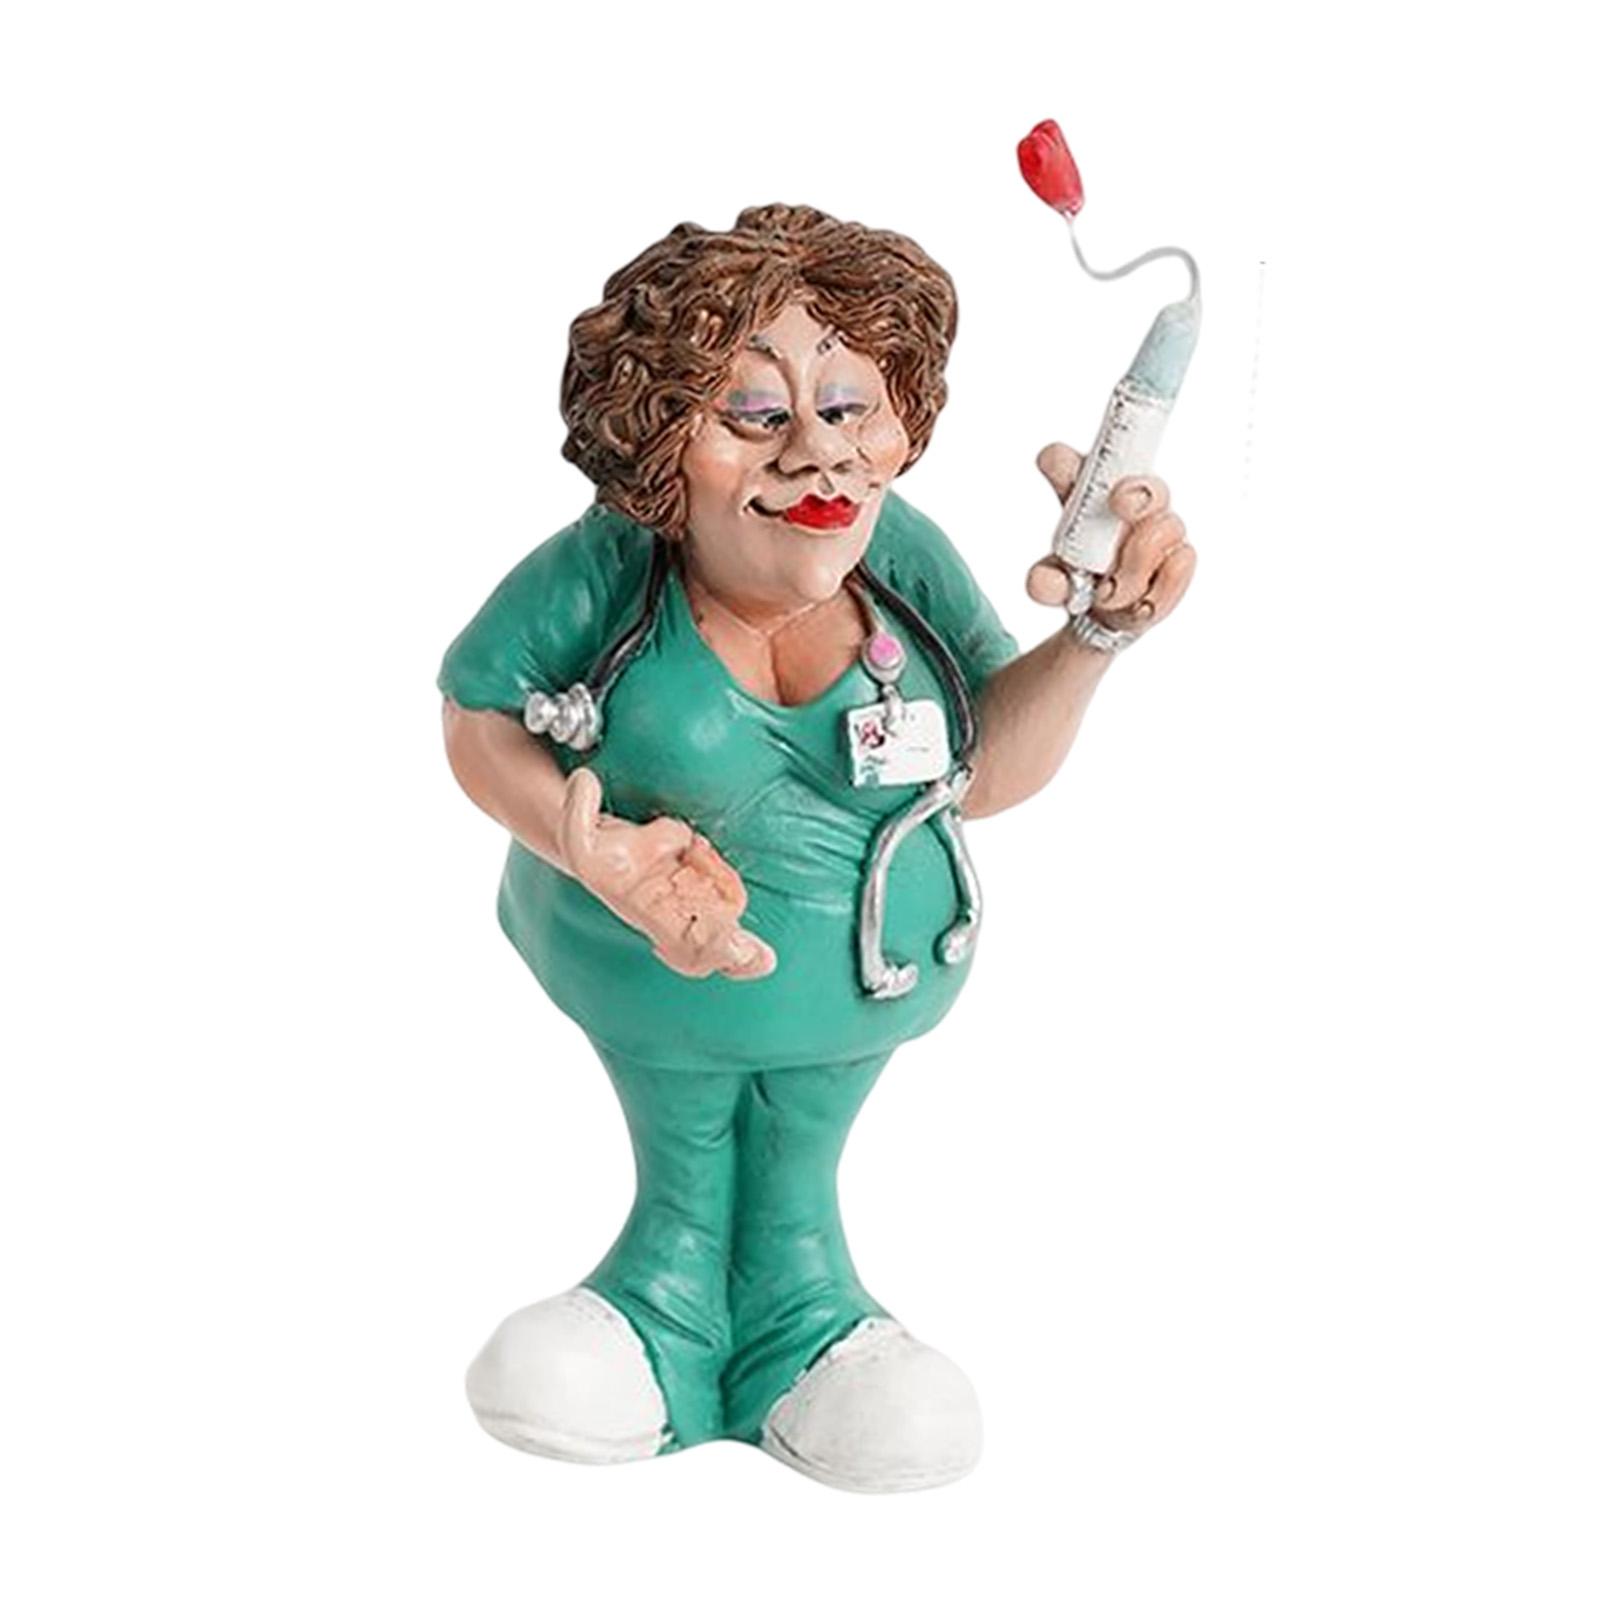 Doctor Statues Figurines Ornament Women Resin Sculpture for Office Bedroom Inject 3x3x6.5in